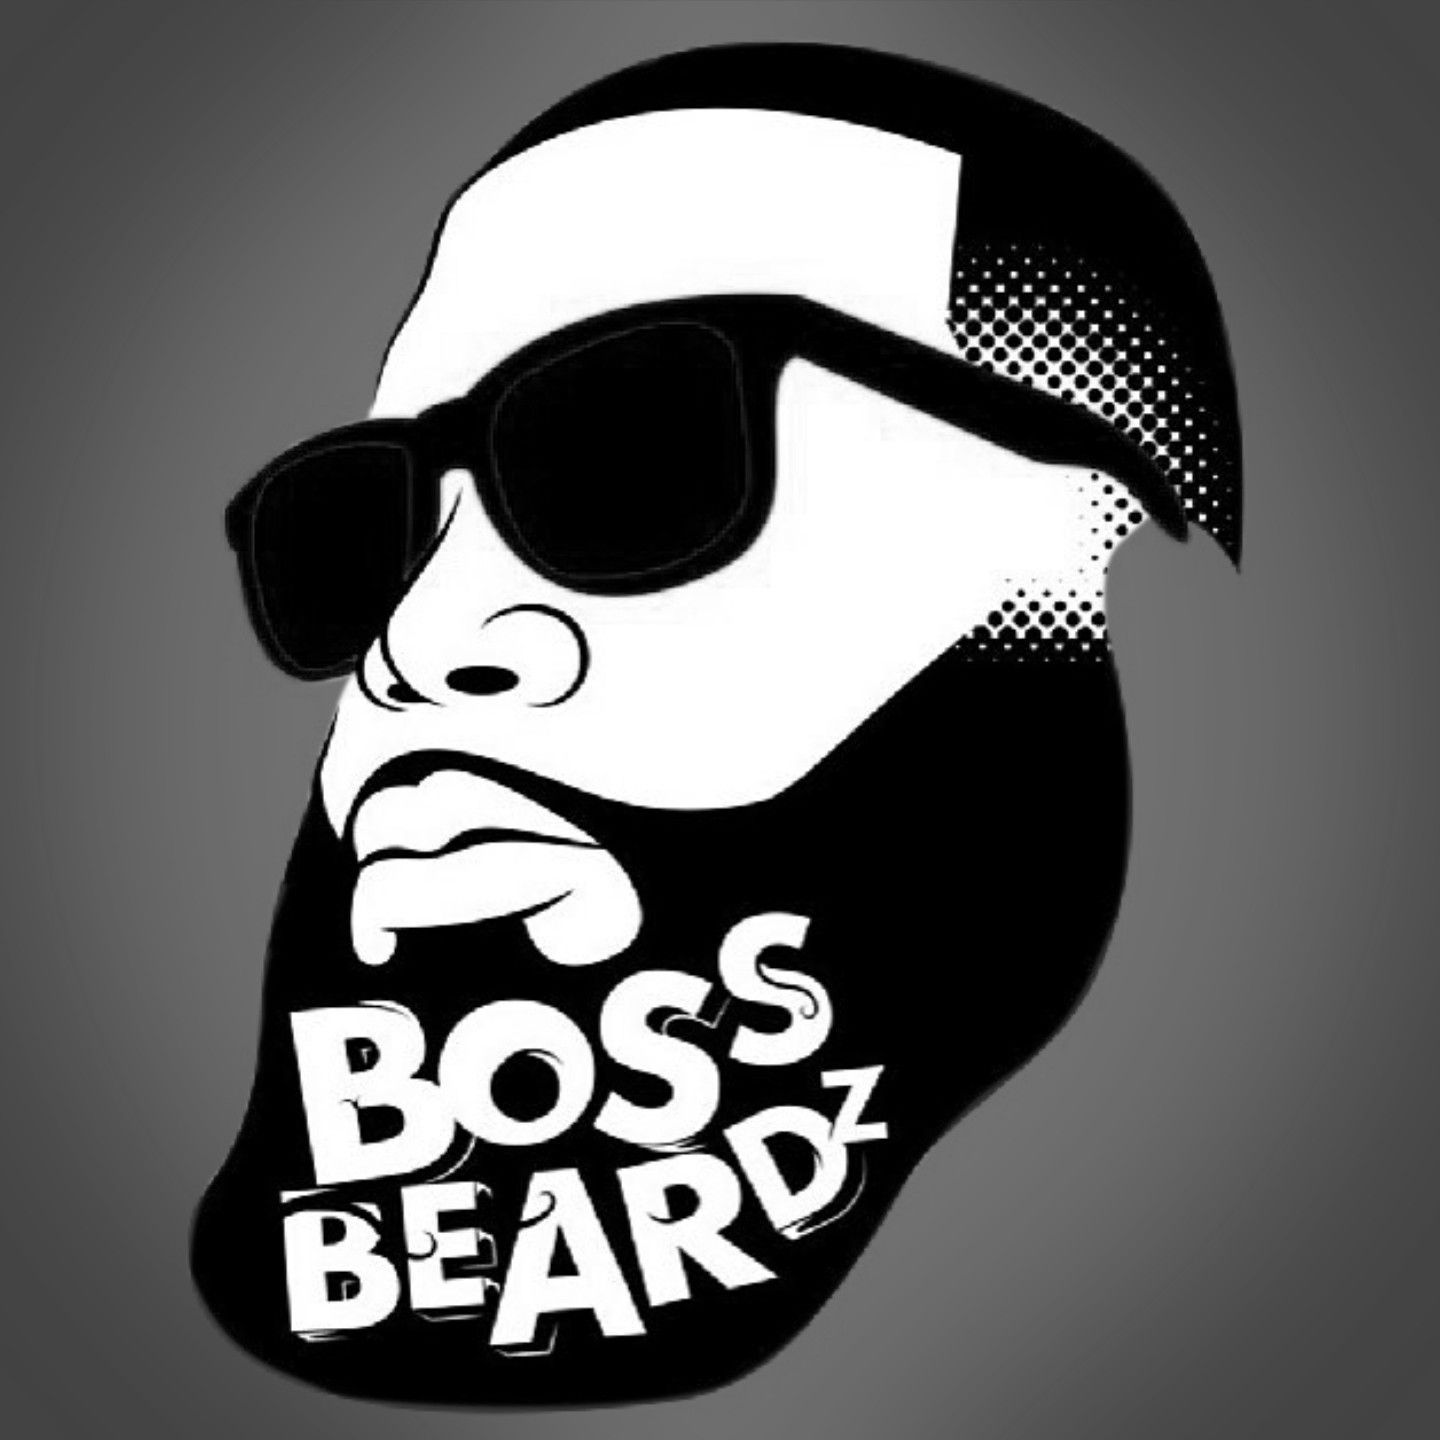 The Boss Lounge (BossBeardz), 724 E. US Hwy 80, Suite 200, Suite #36, Forney, 75126